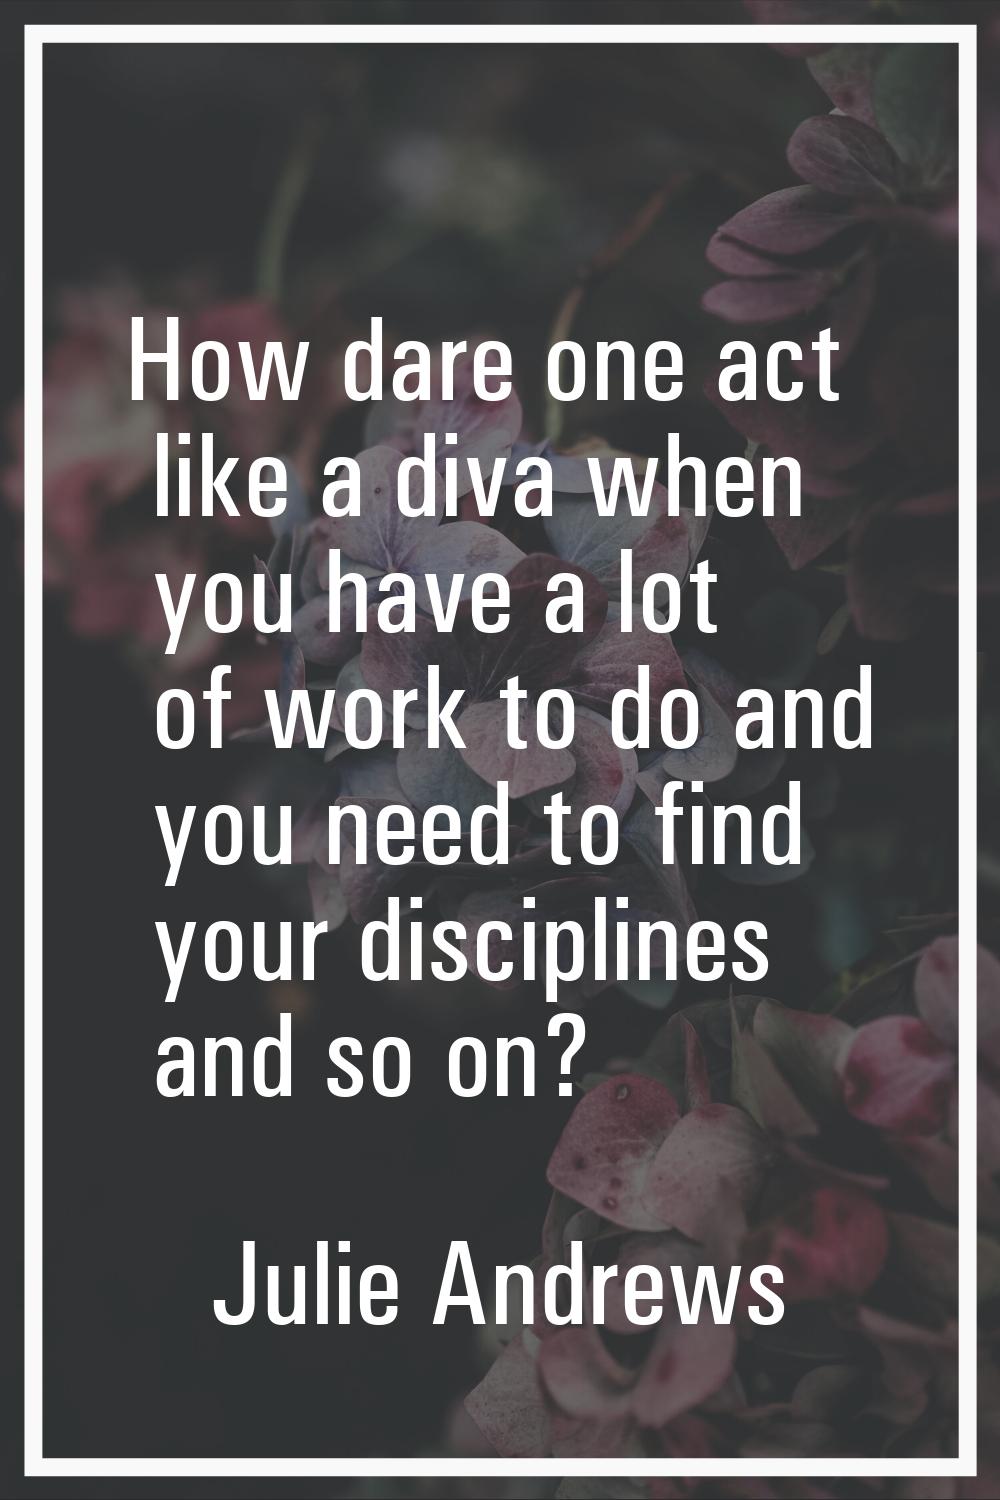 How dare one act like a diva when you have a lot of work to do and you need to find your discipline